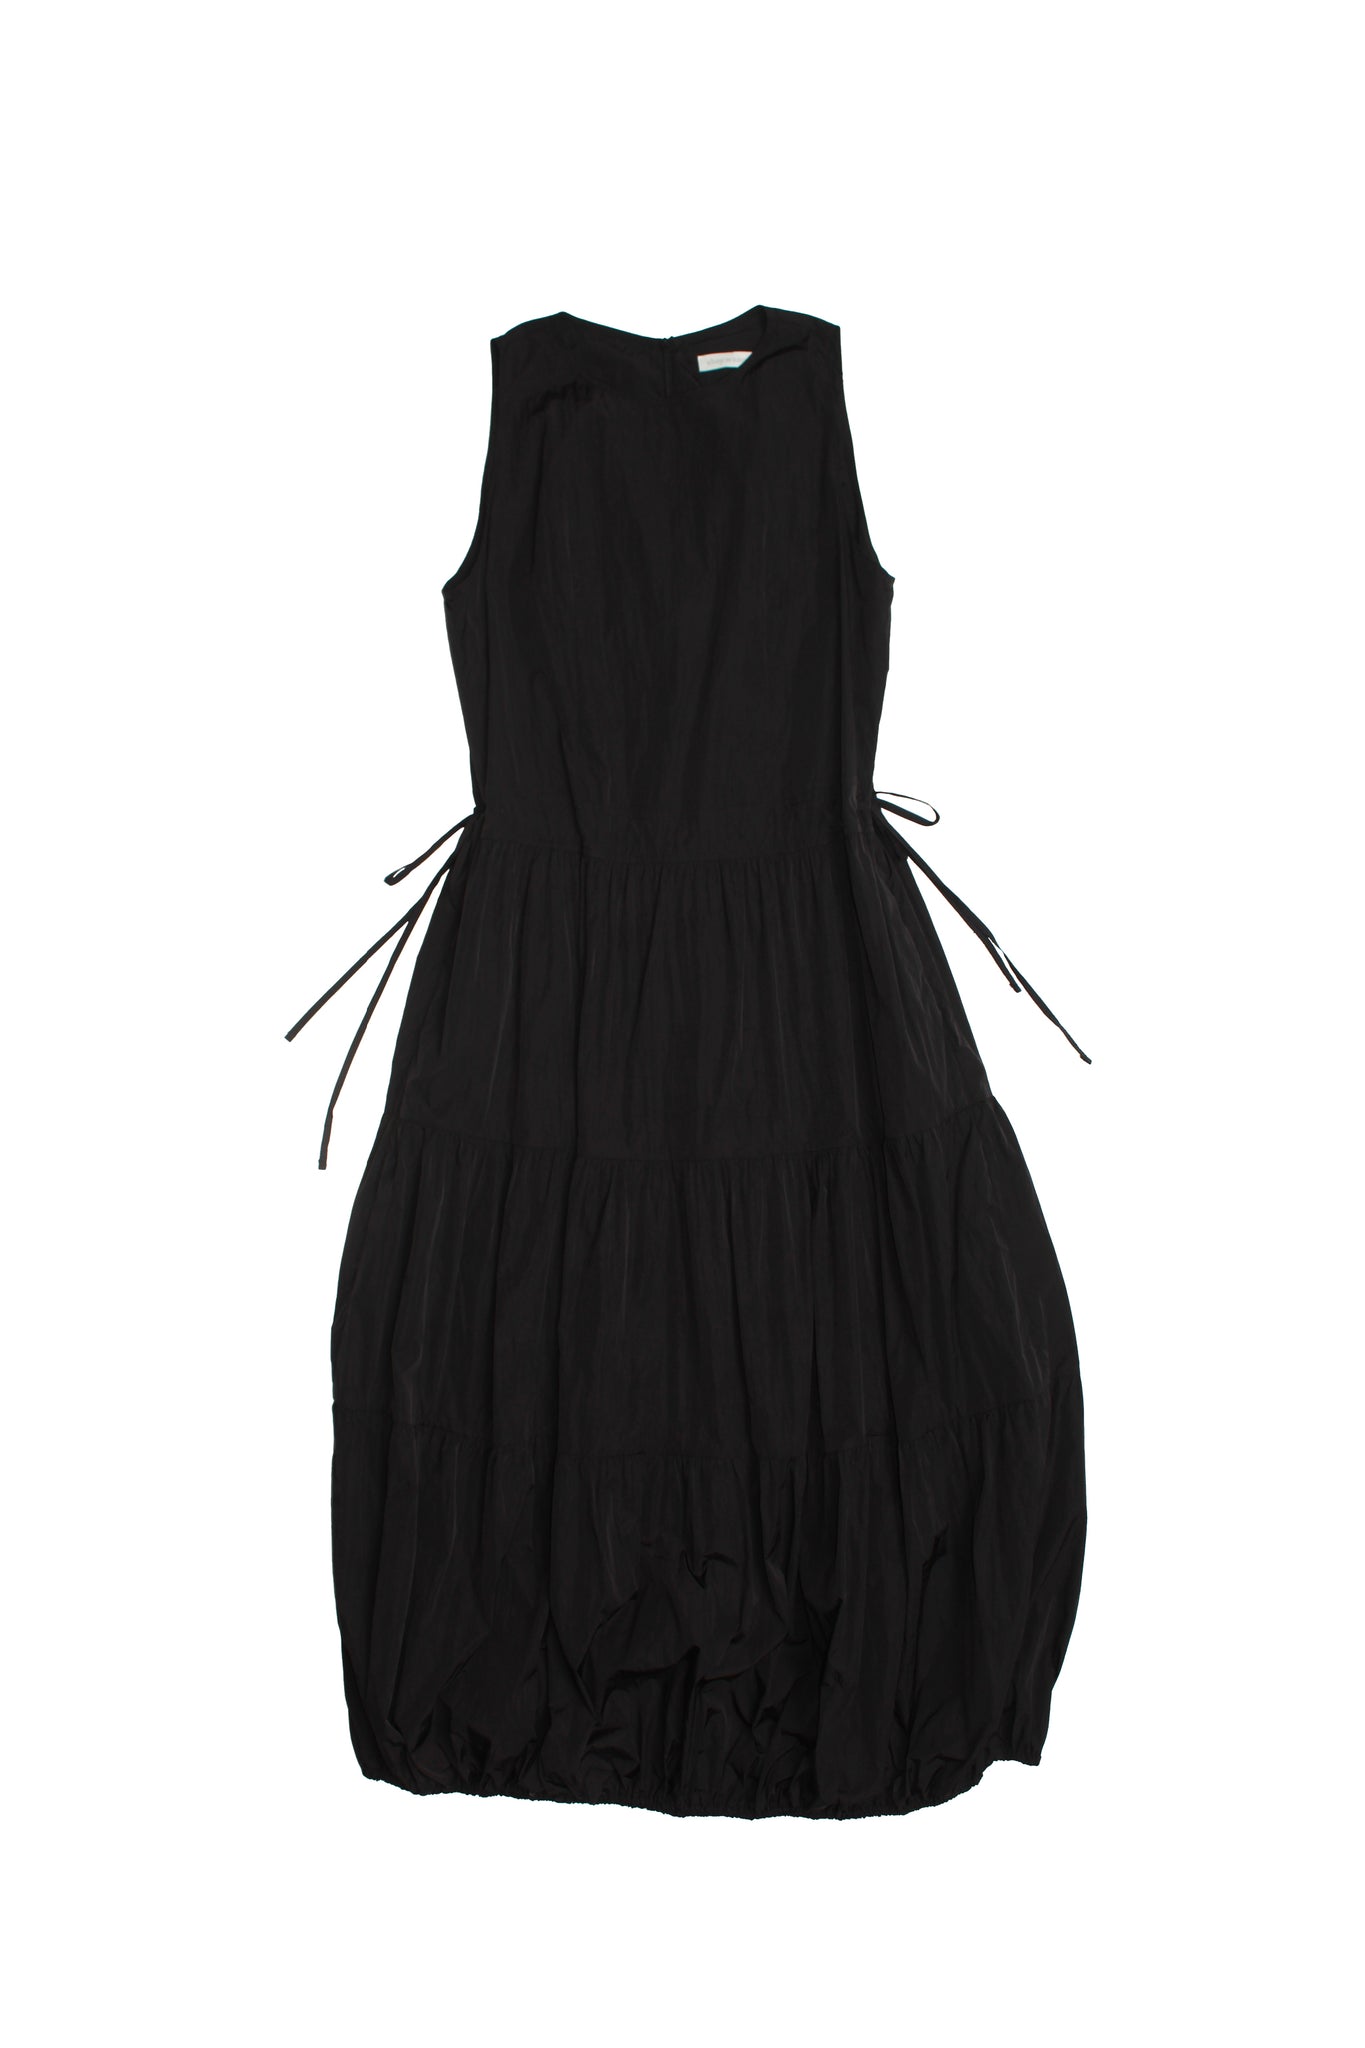 Melody Tiered Dress in Black